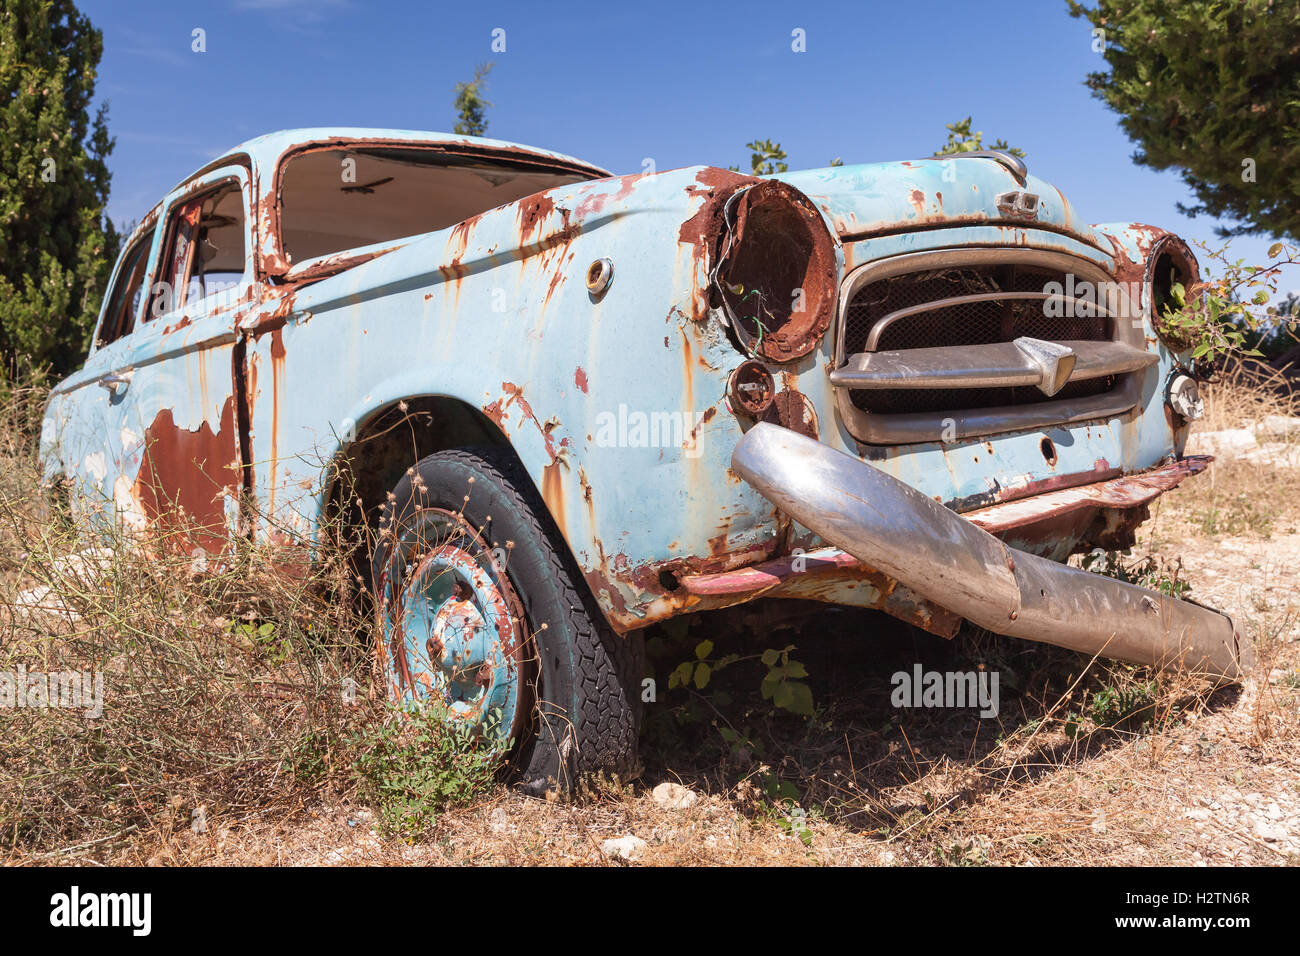 Zakynthos, Greece - August 20, 2016: Old abandoned vintage rusted car stands in summer garden Stock Photo